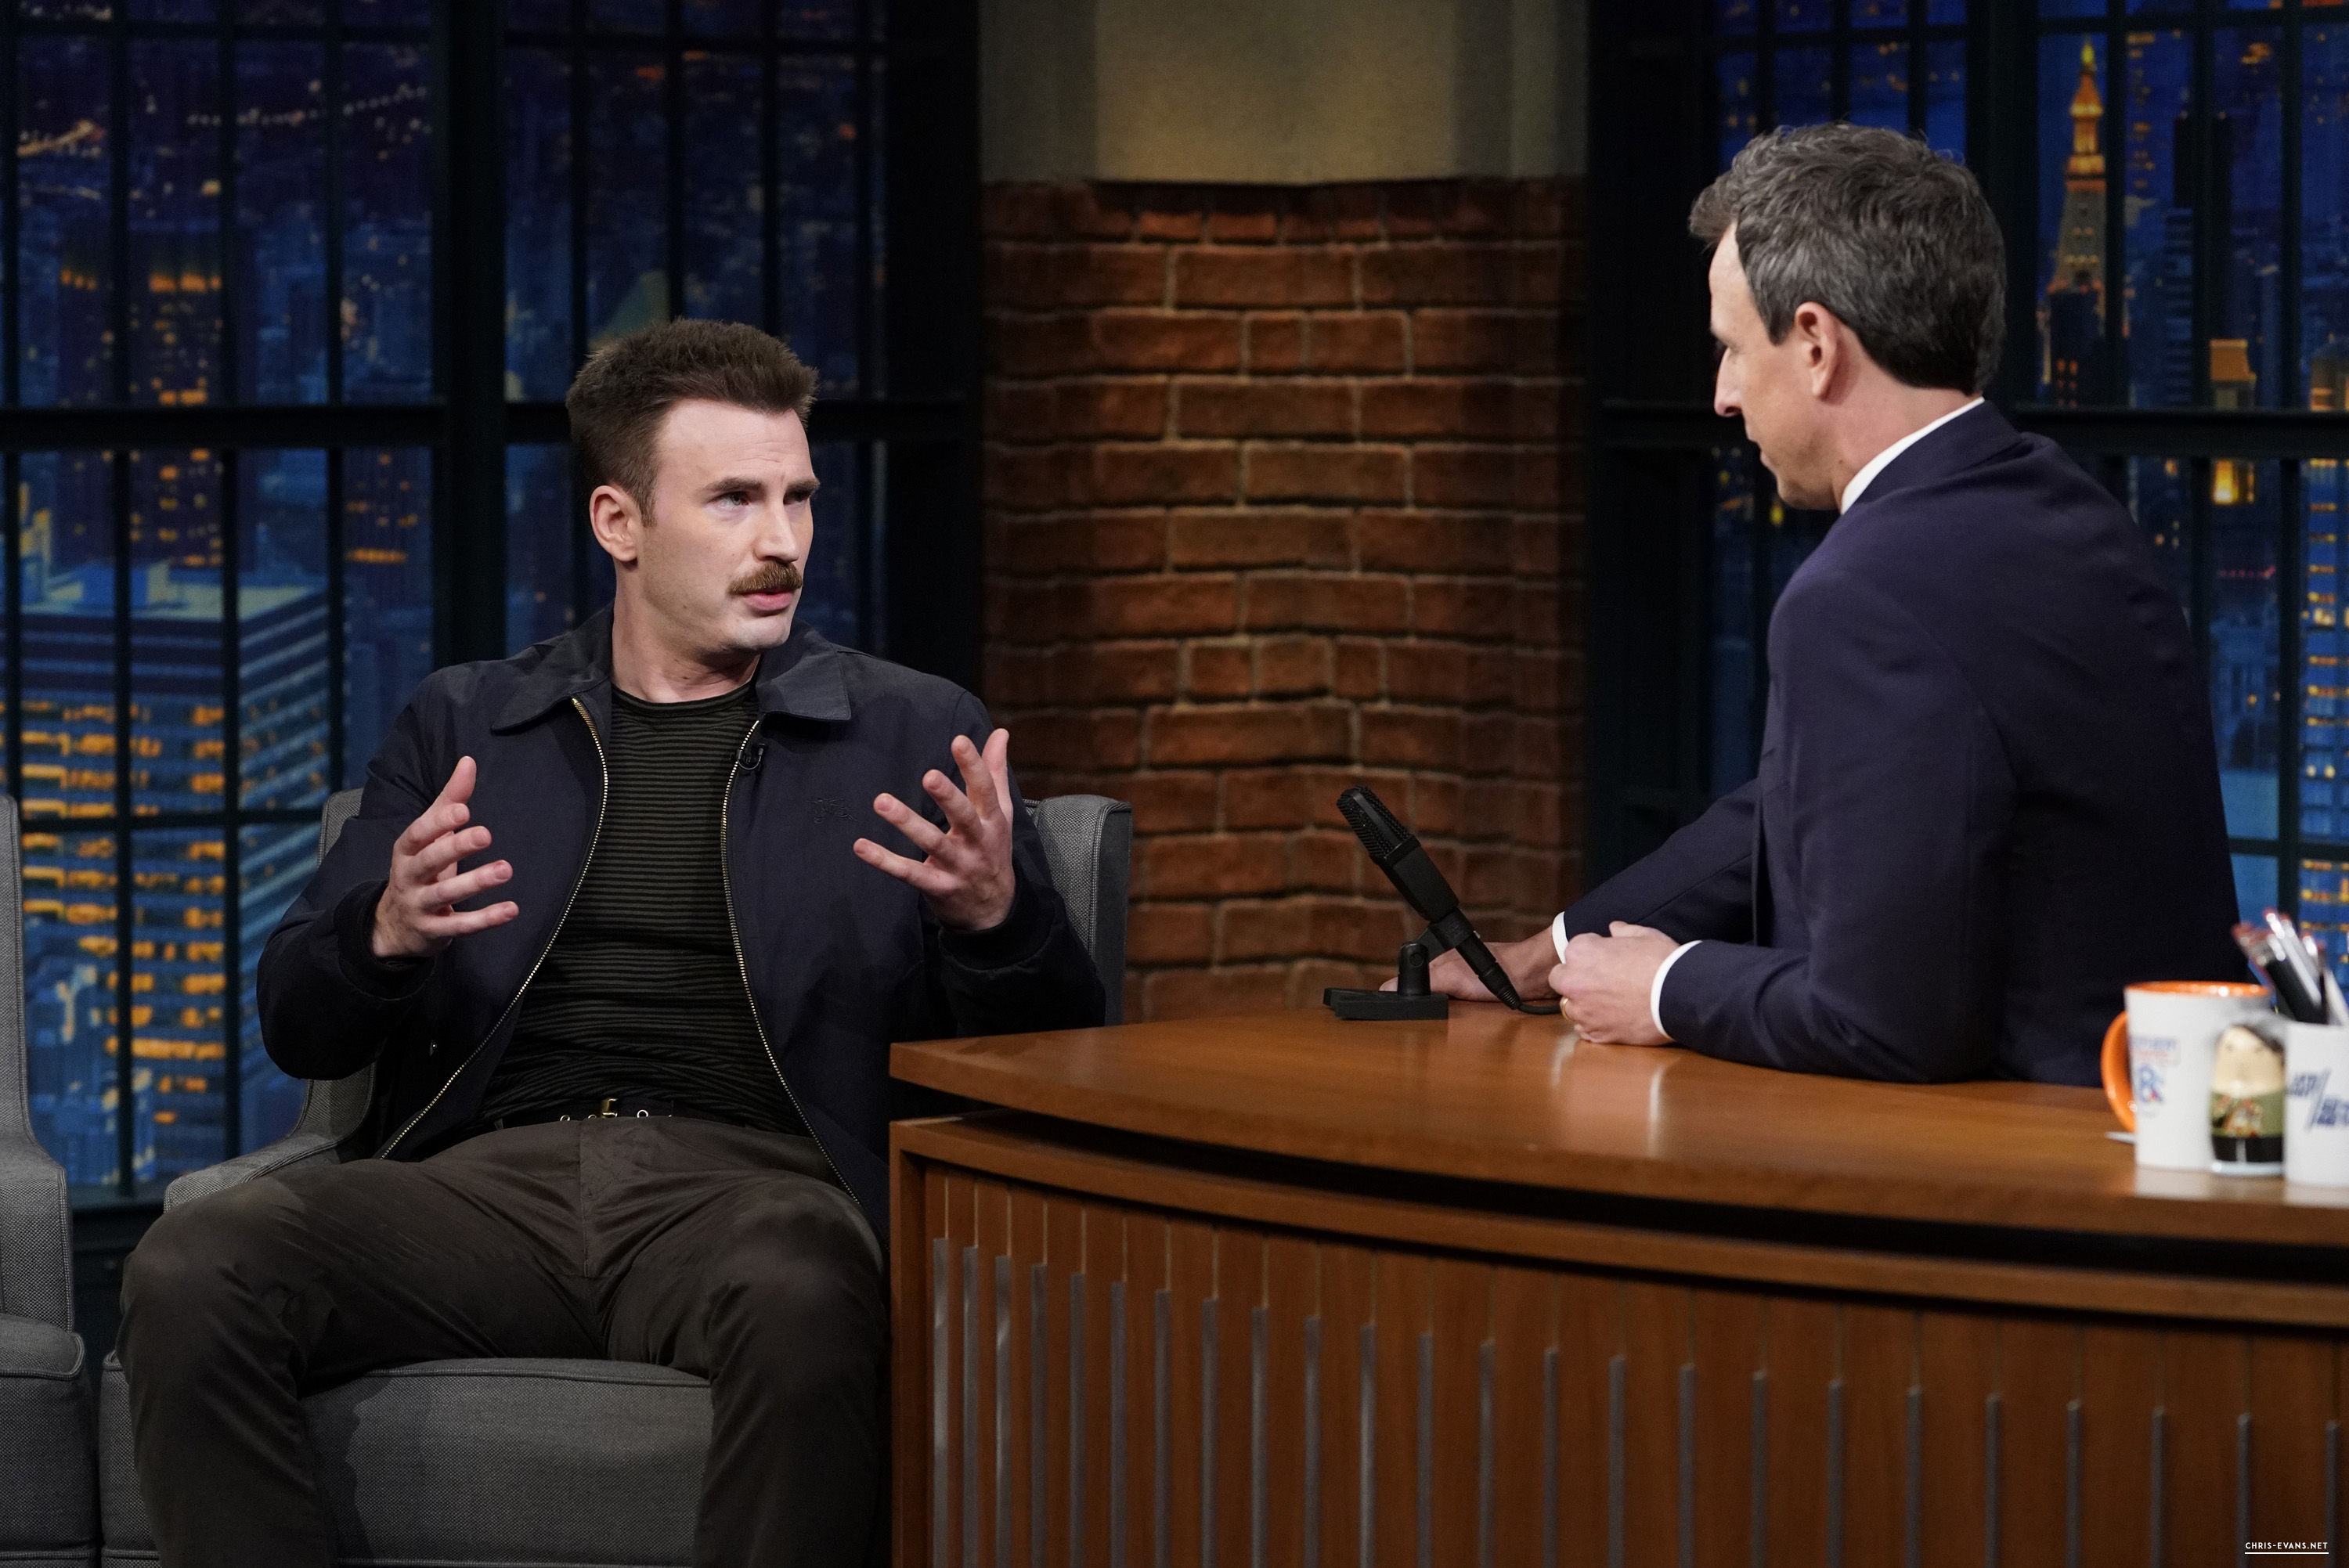 http://chris-evans.net/photos/albums/Appearances/2018/04%2023%20Late%20Night%20with%20Seth%20Meyers/002.jpg